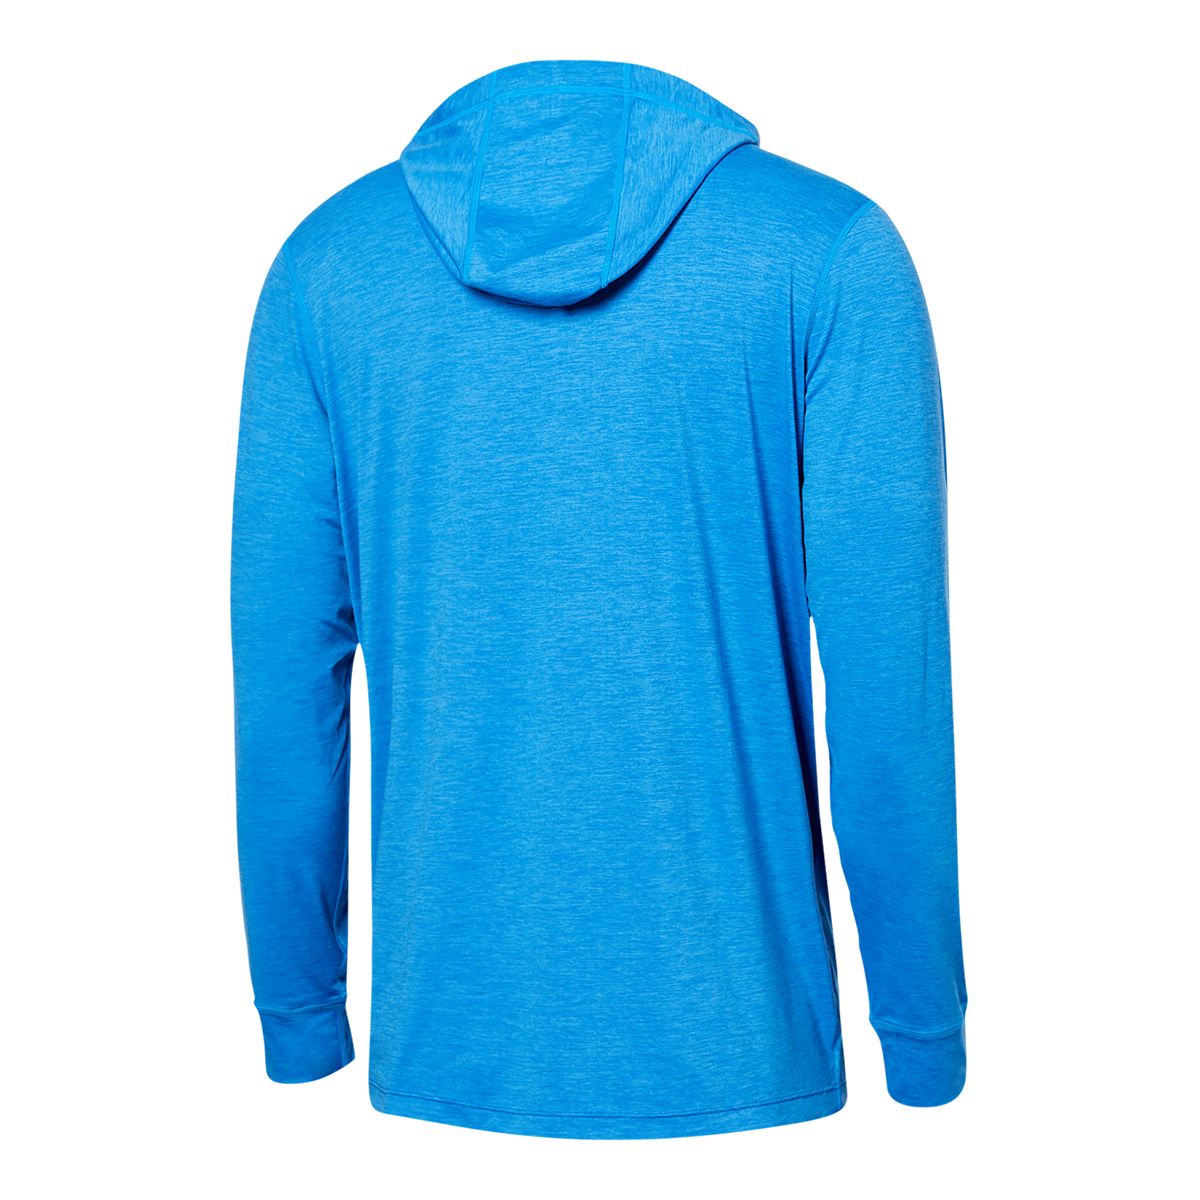 https://media-www.sportchek.ca/product/div-03-softgoods/dpt-72-casual-clothing/sdpt-01-mens/334021385/saxx-men-s-droptemp-cooling-hoodie-8bbc5d4a-755c-4c7a-b726-b5bf46be80f9-jpgrendition.jpg?imdensity=1&imwidth=1244&impolicy=mZoom